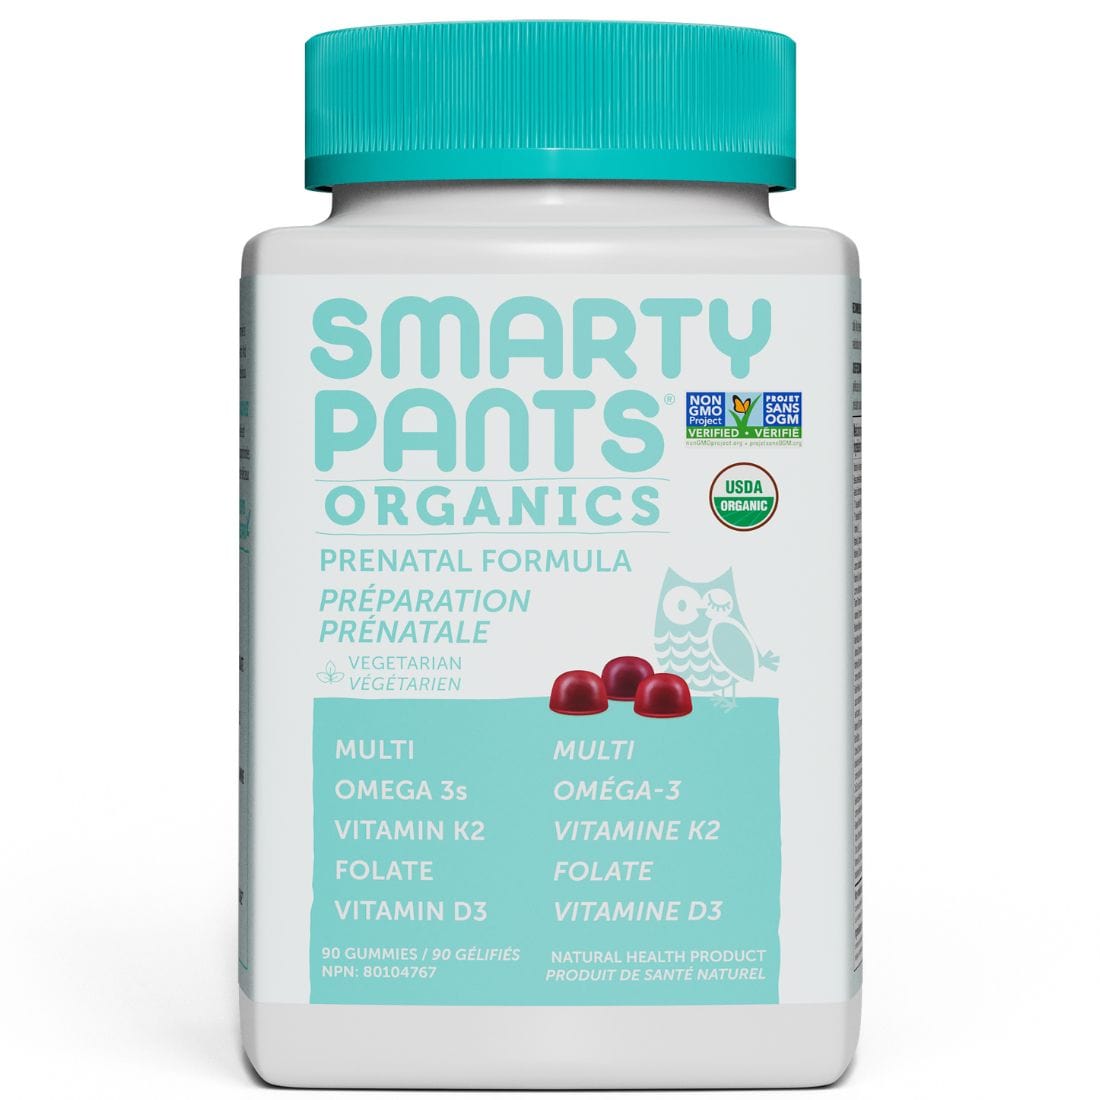 SmartyPants a Leading Gummy Supplement Brand Introduces its New Capsule  Line